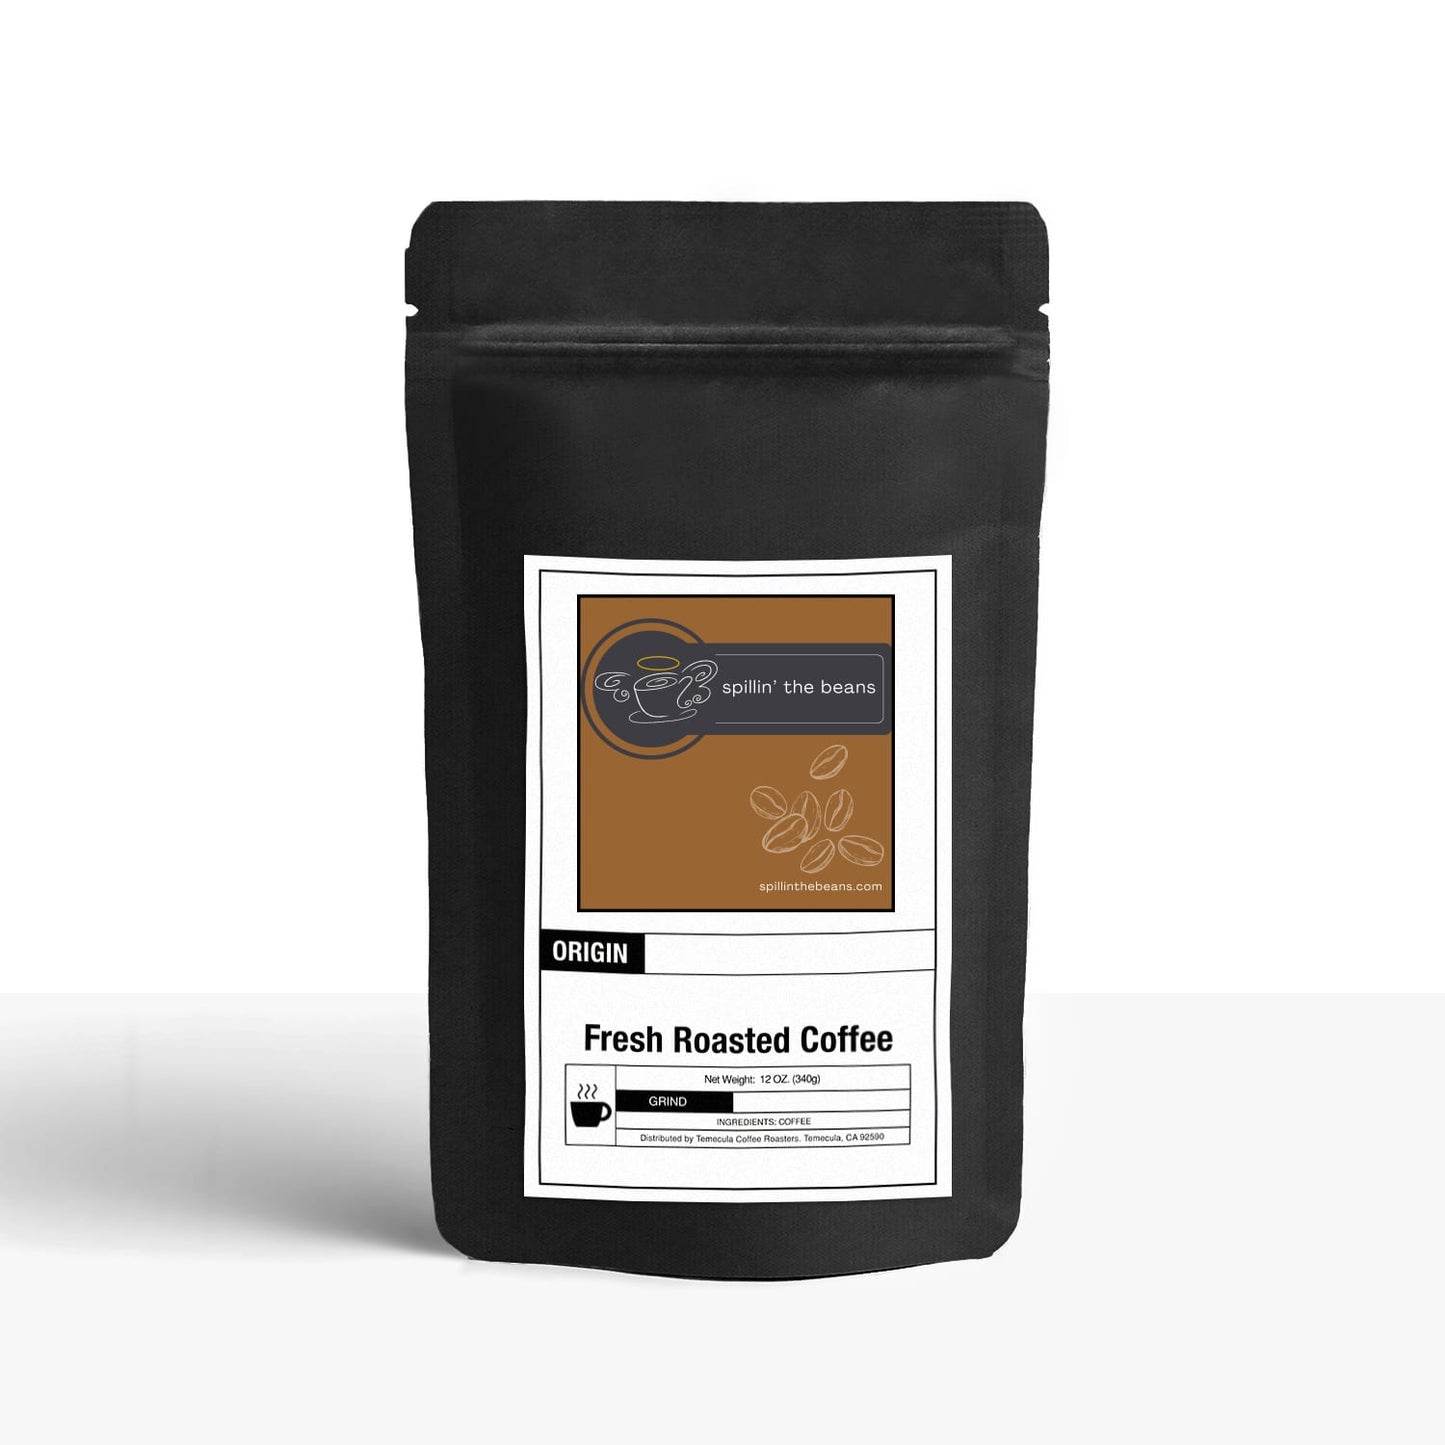 Coffee Collection - Gourmet Donut Shop Coffee - Shipping Included